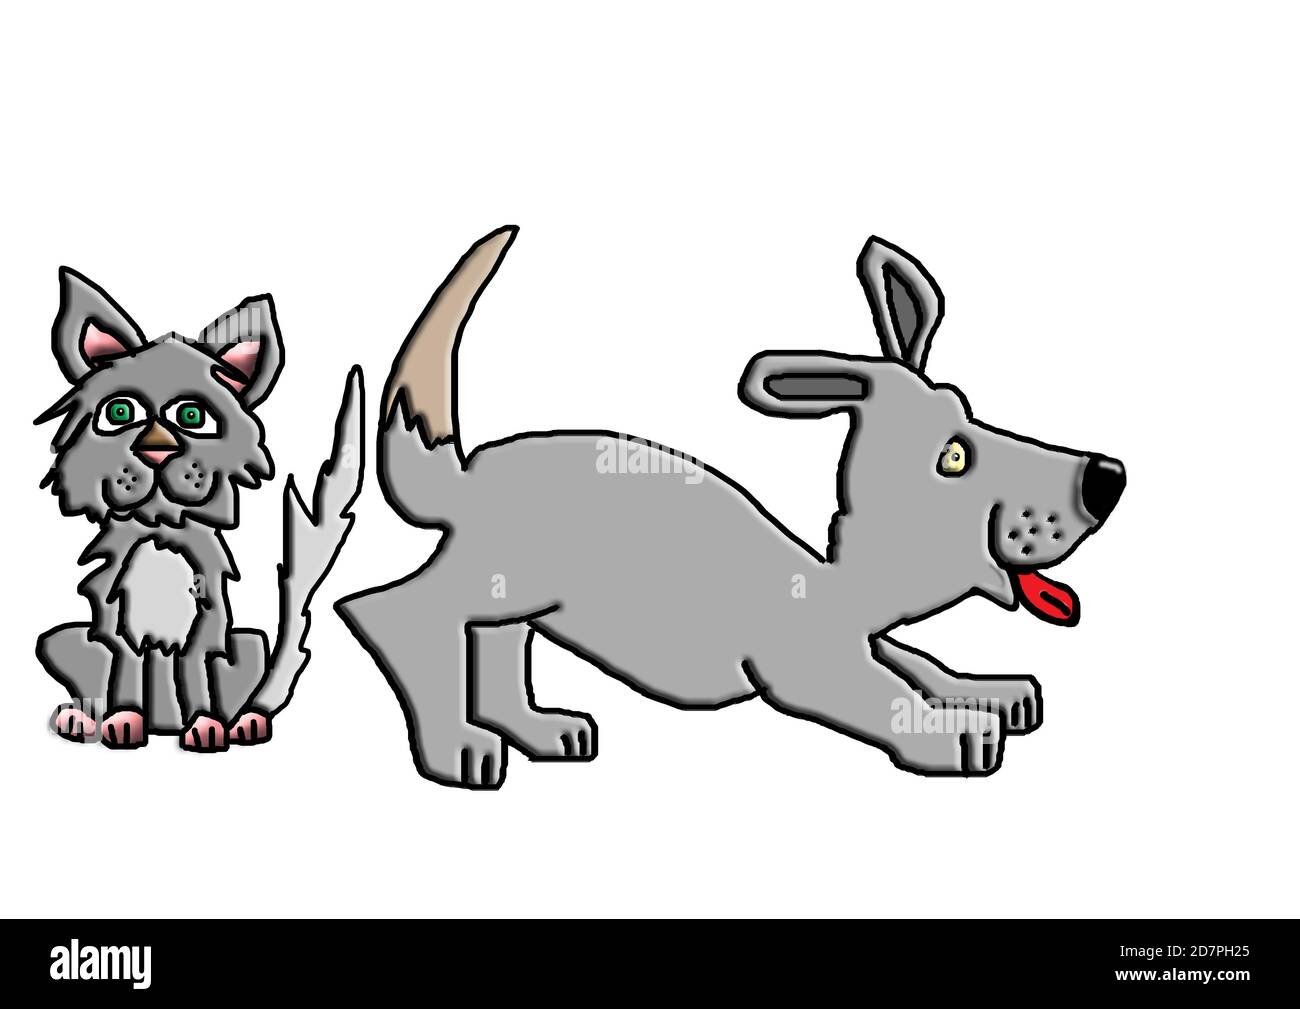 Cartoon illustration a cat and a dog with digital effects artwork in  landscape format cat sitting up dog with pounce pose wagging tail and  tongue out Stock Photo - Alamy